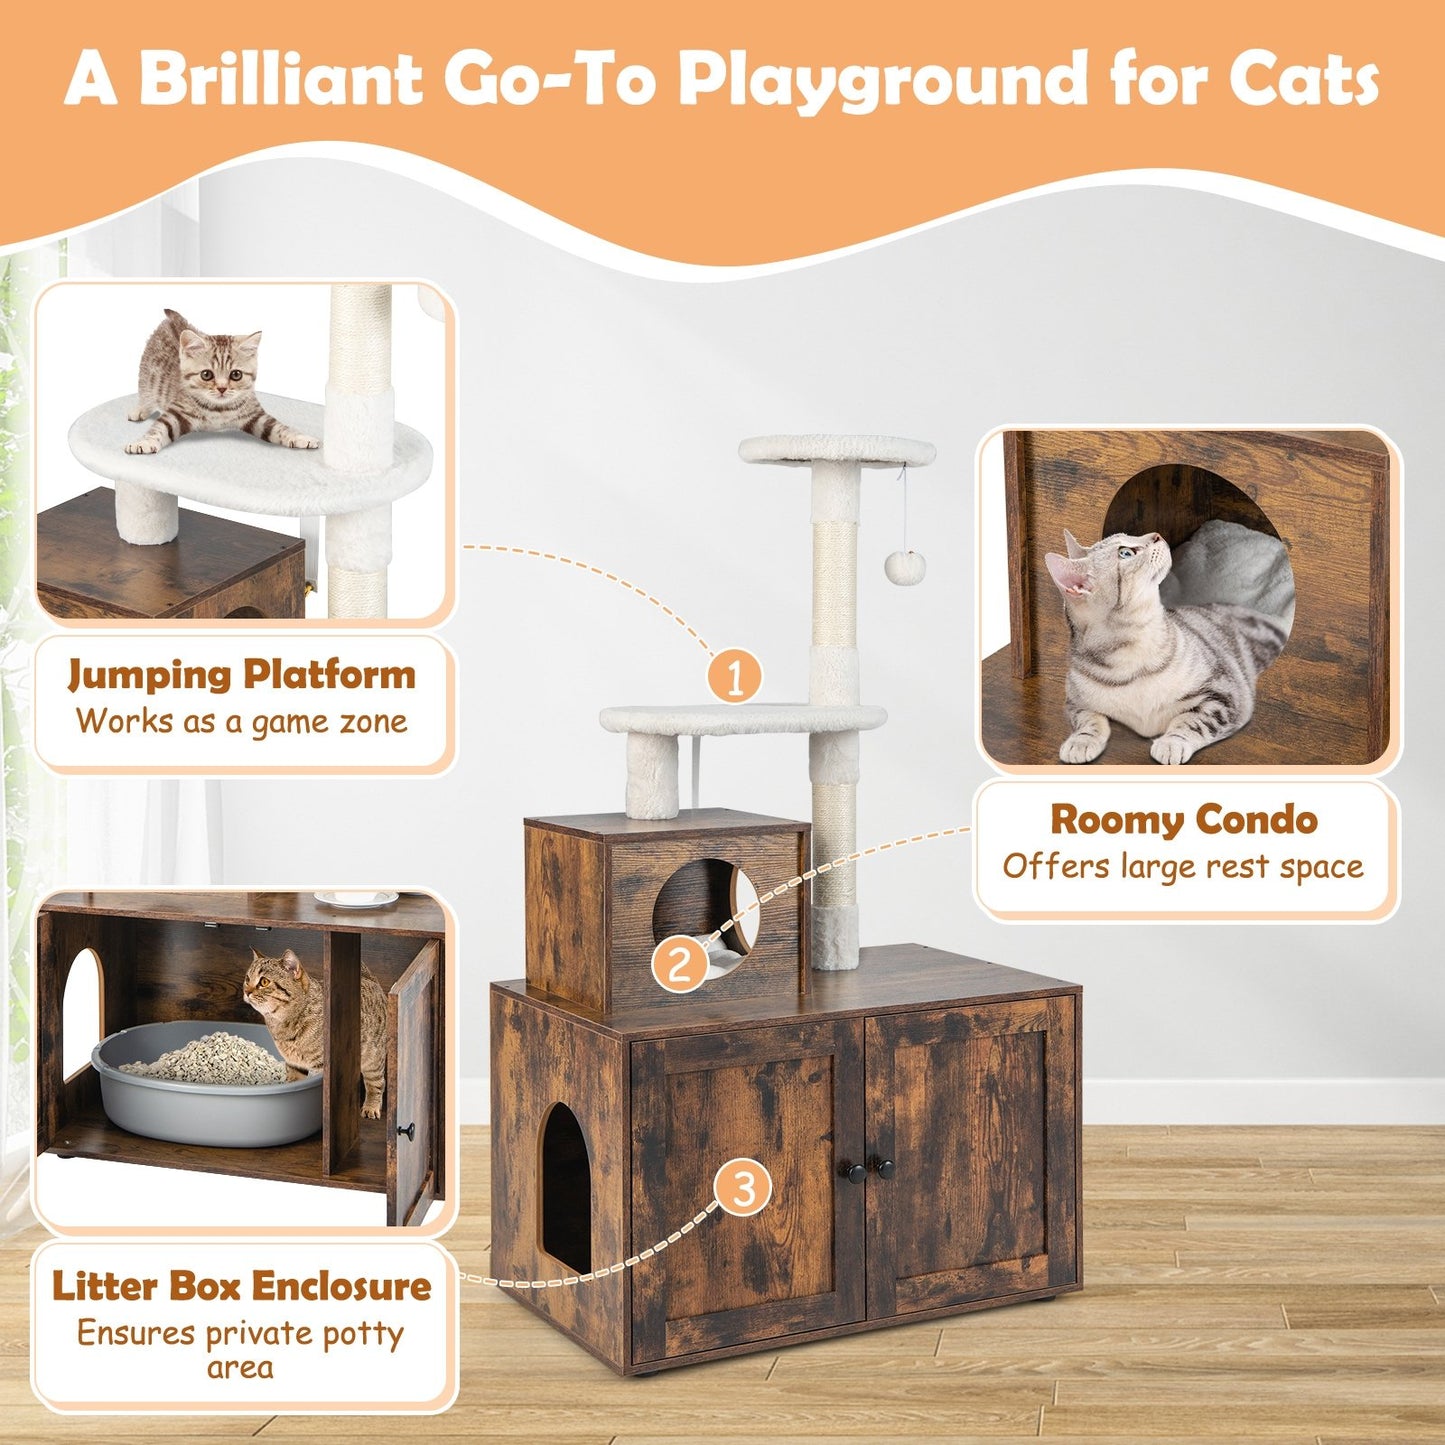 Cat Tree with Litter Box Enclosure with Cat Condo, Rustic Brown